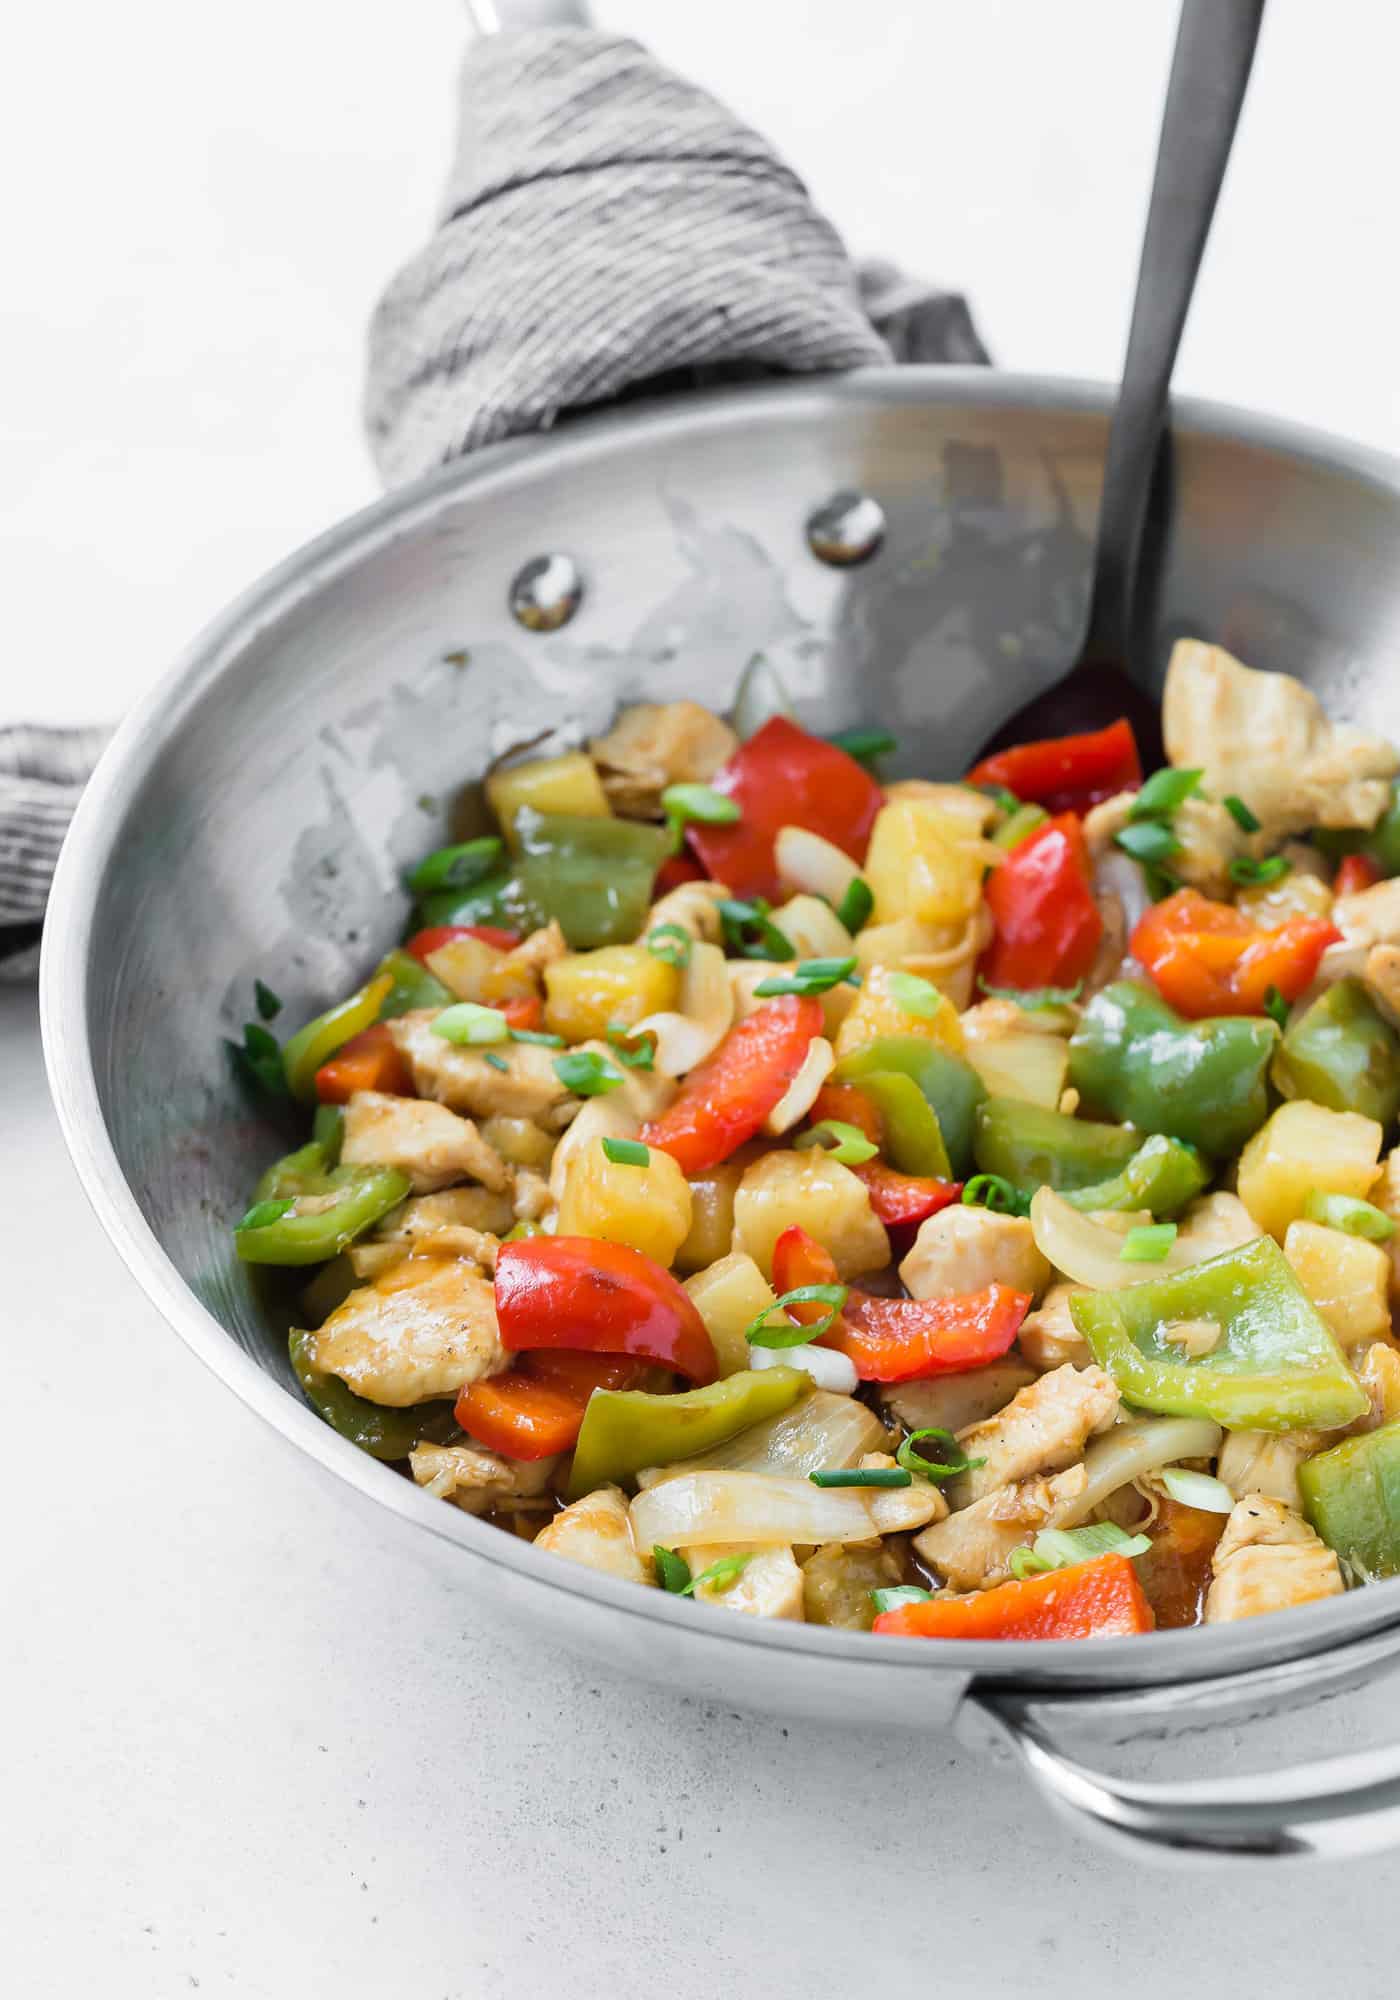 Chicken stir fry with sweet and sour sauce and vegetables.